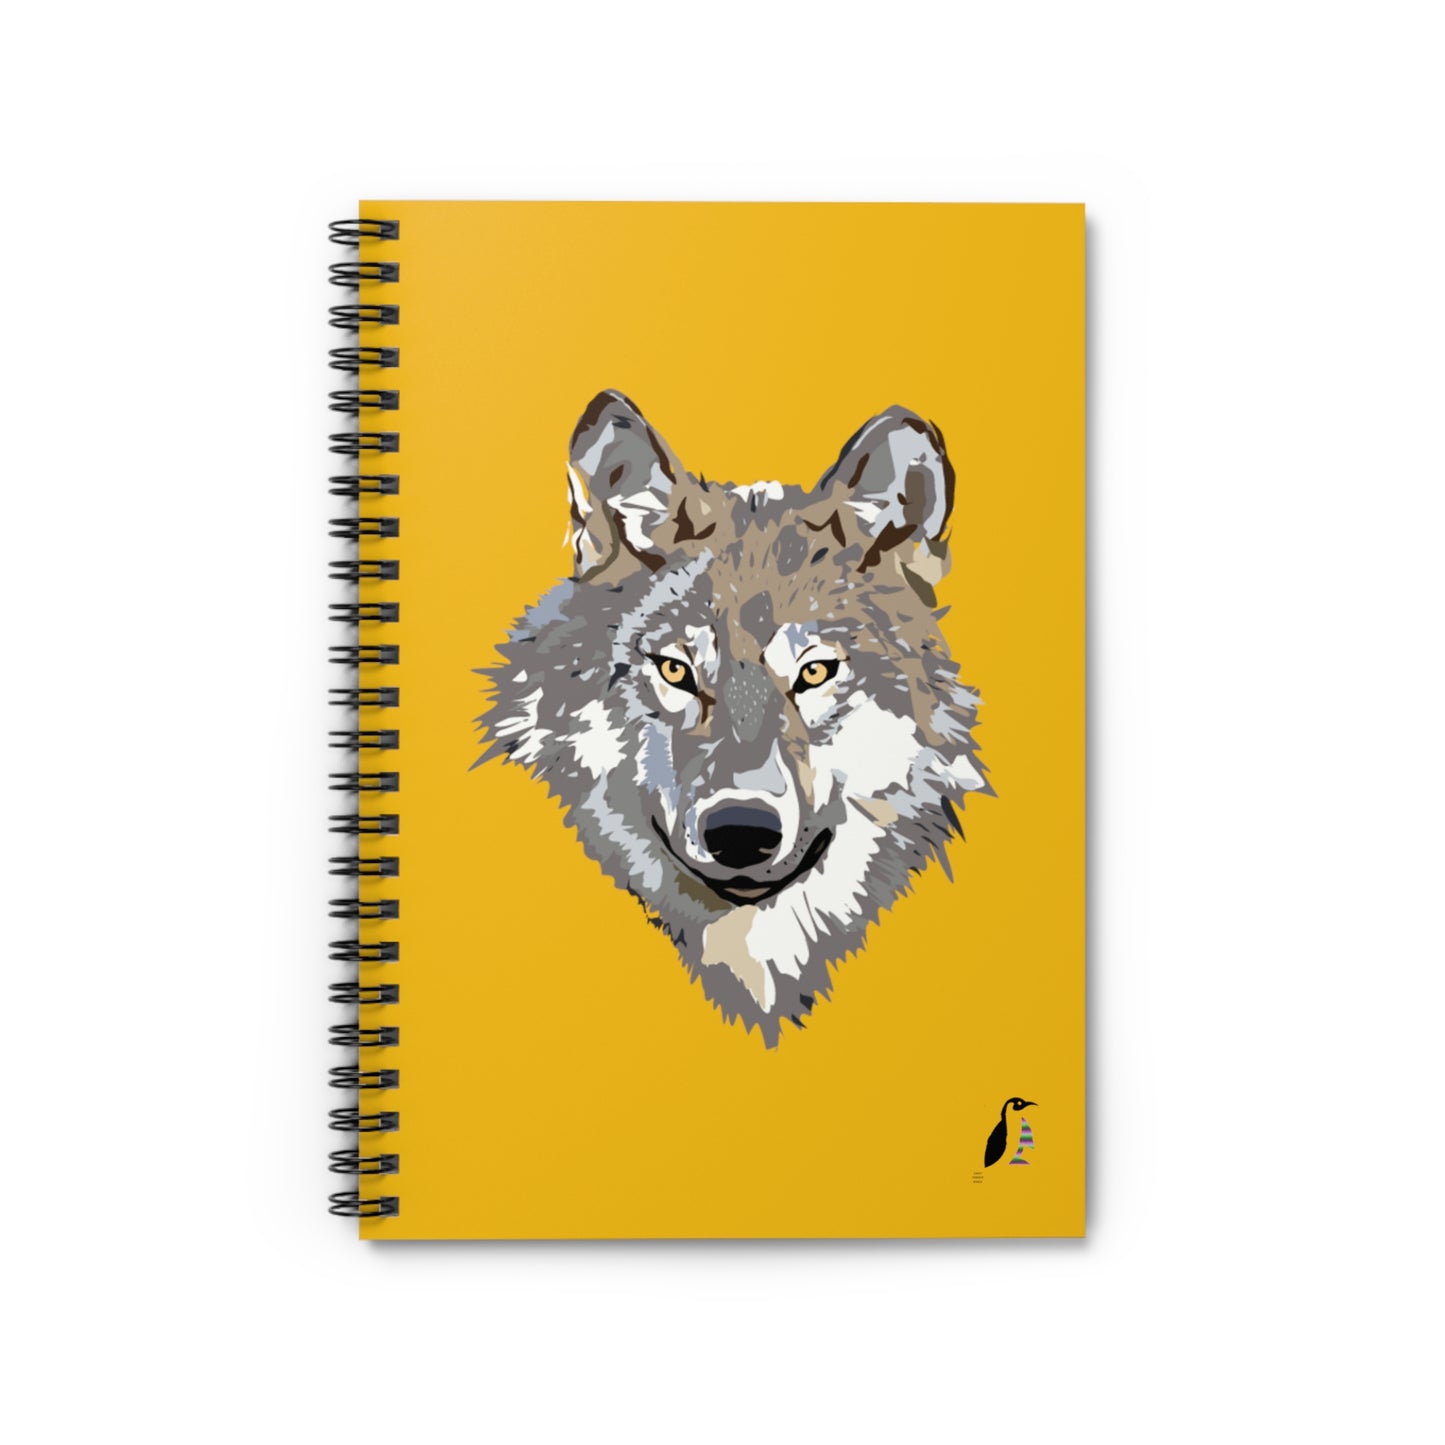 Spiral Notebook - Ruled Line: Wolves Yellow